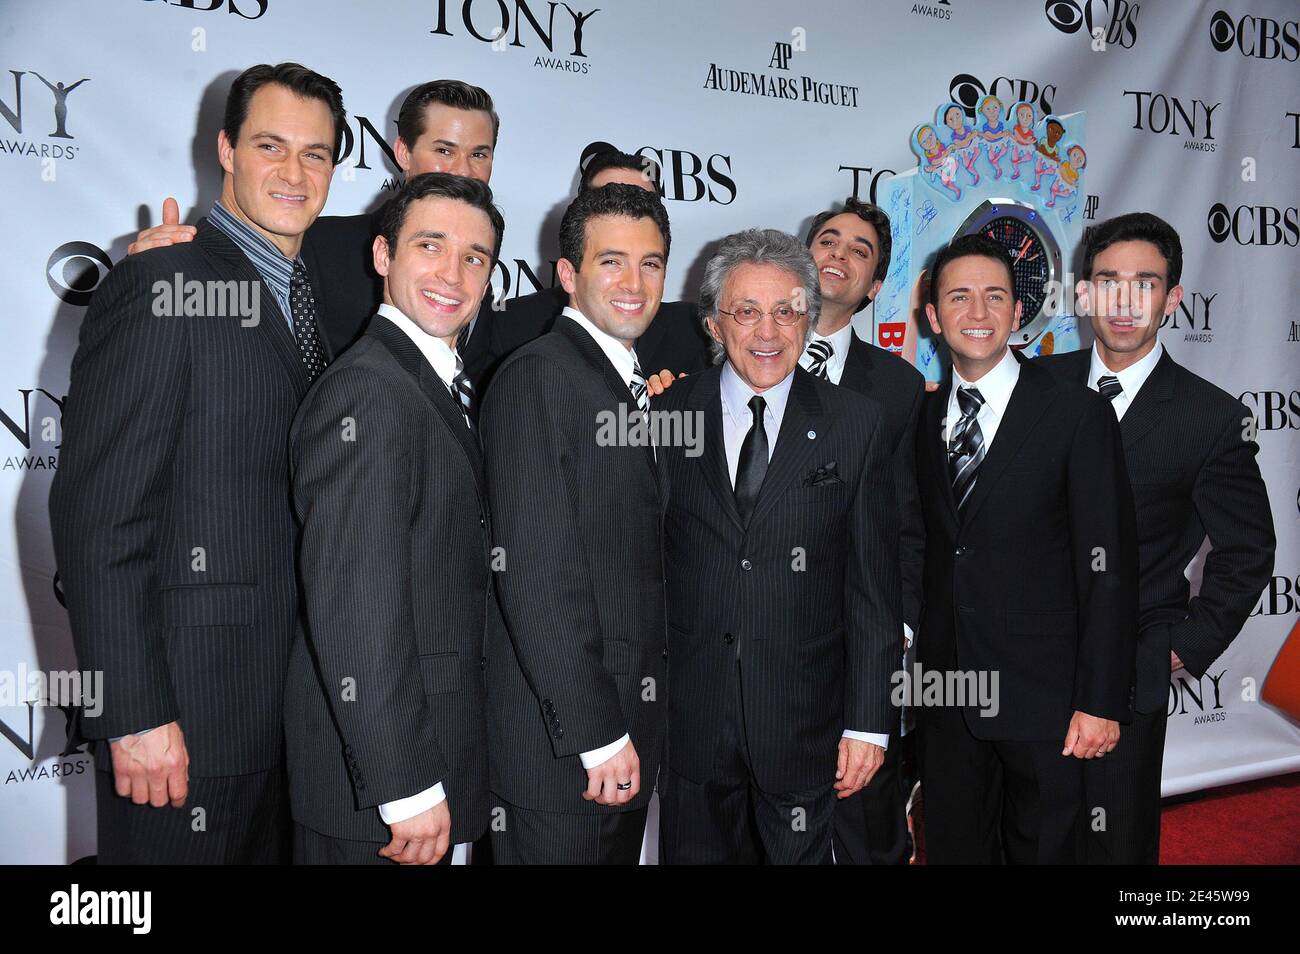 Frankie Valli and the cast of 'Jersey Boys' attend the 63rd Annual Tony  Awards at Radio City Music Hall in New York City, USA on June 7, 2009.  Photo by Gregorio Binuya/ABACAPRESS.COM (